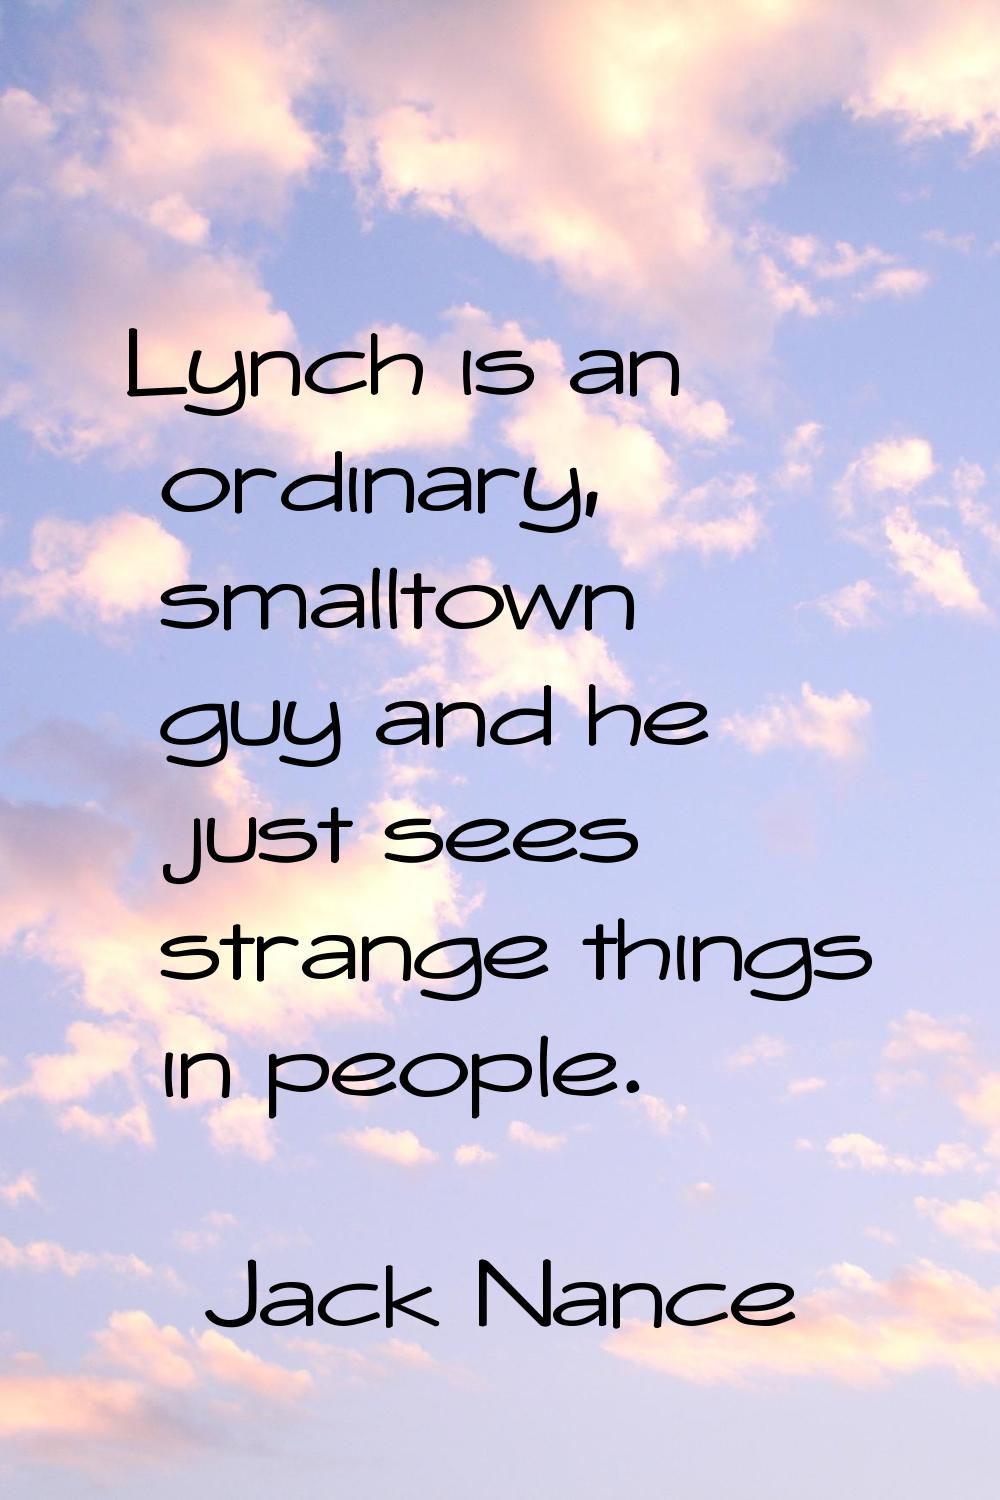 Lynch is an ordinary, smalltown guy and he just sees strange things in people.